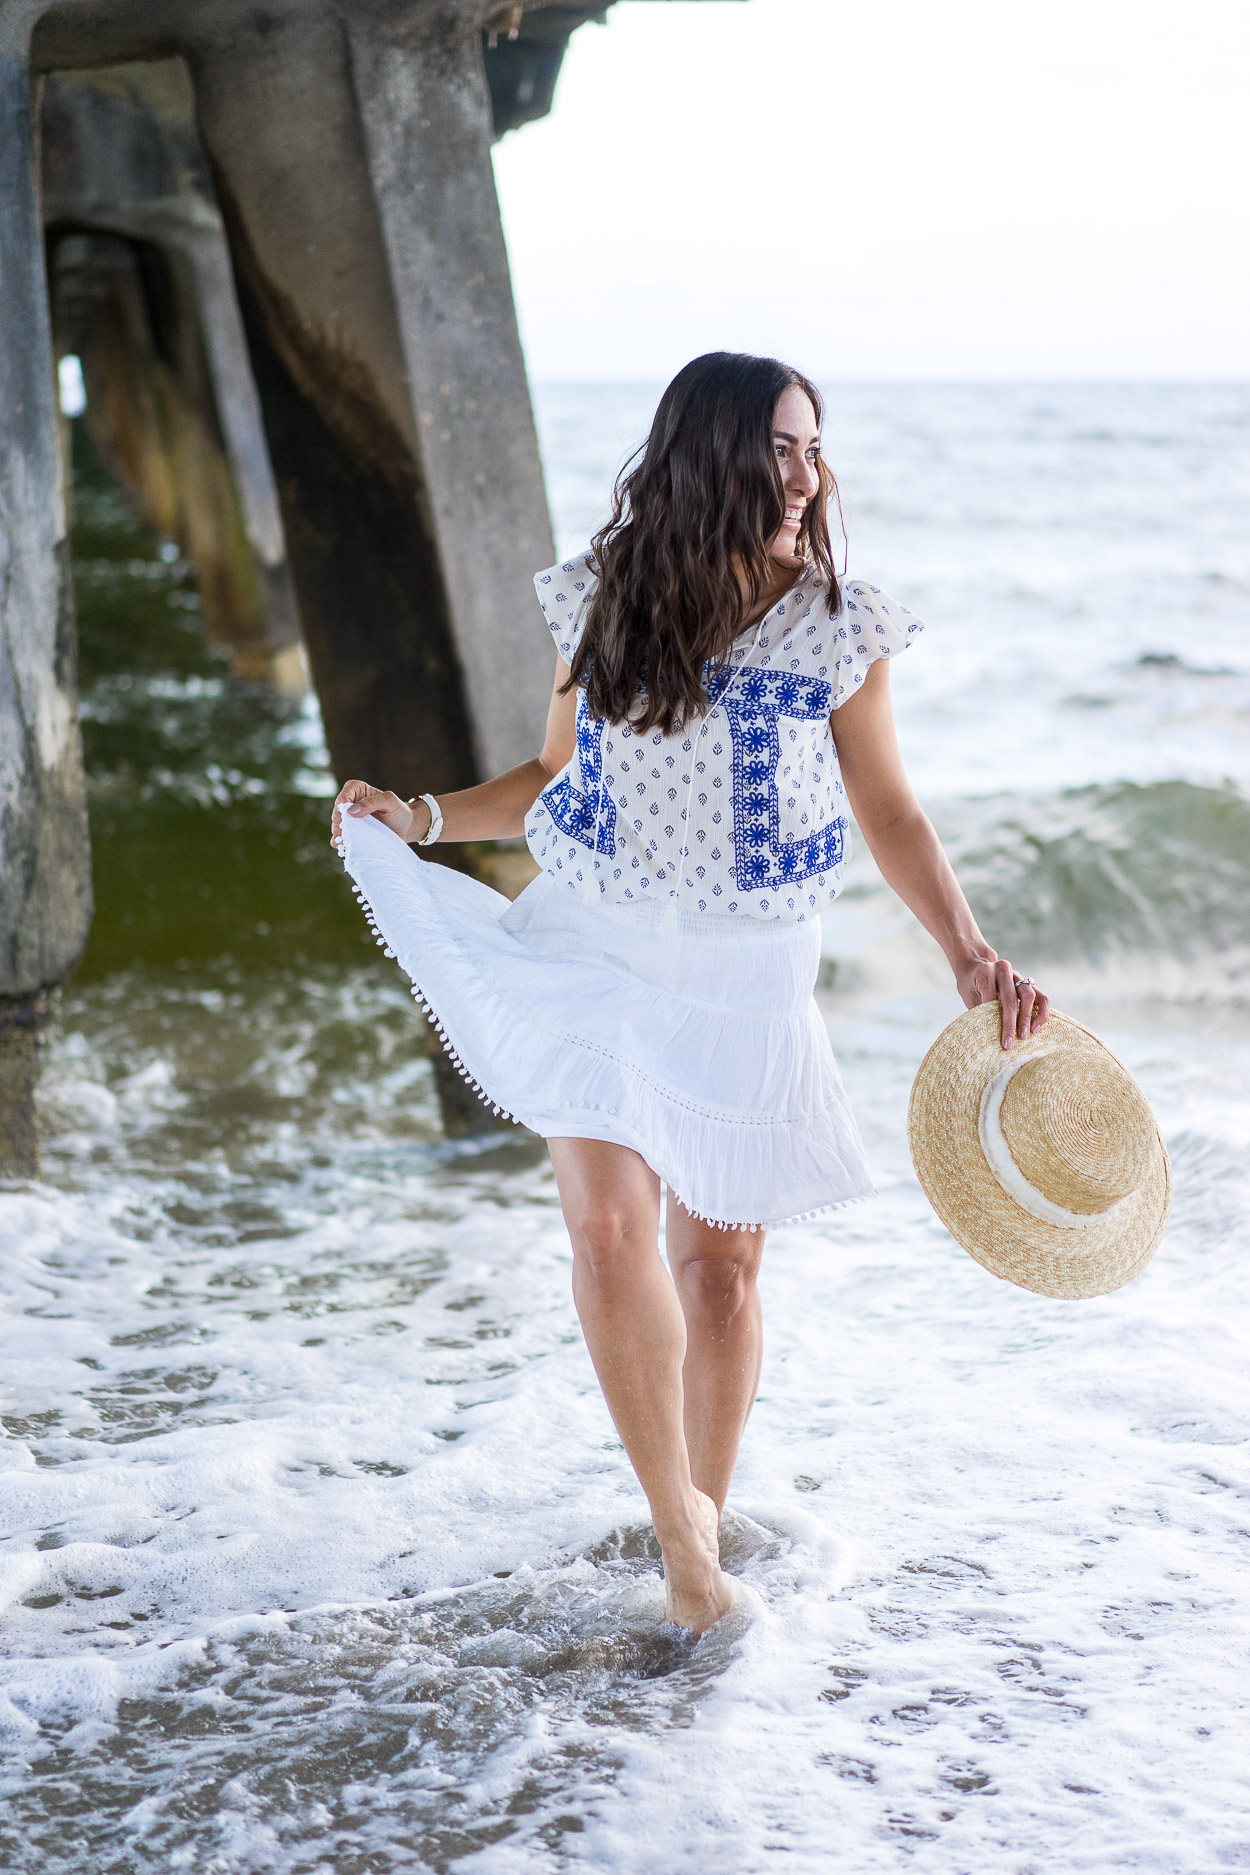 Blogger picks from Old Navy Summer favorites include pom pom skirt and white embroidered shirt with straw boater hat for beach style